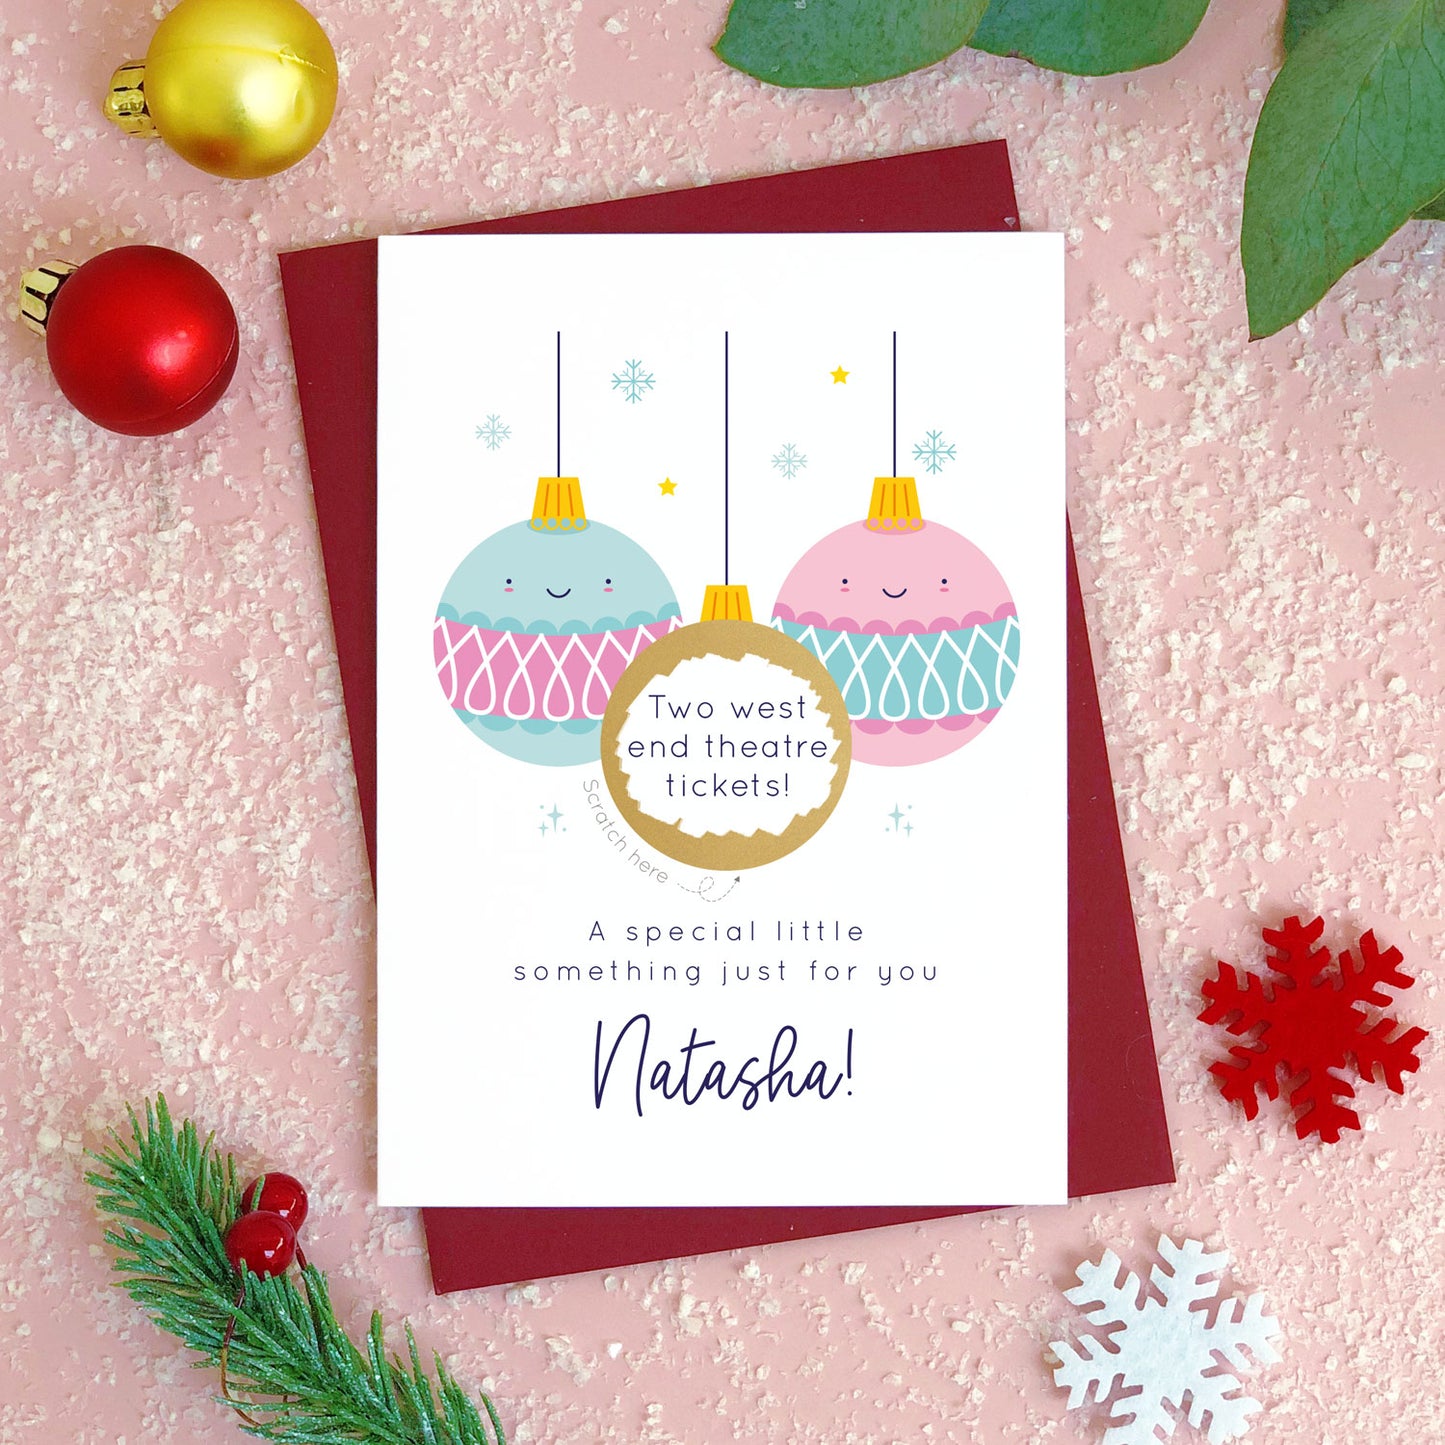 A personalised Christmas bauble scratch card photographed flat lying on a red wine coloured envelope on a pink surface surrounded by fake snow, baubles and foliage. The card is the pink and blue bauble version and the gold panel has been scratched off to reveal the custom message.